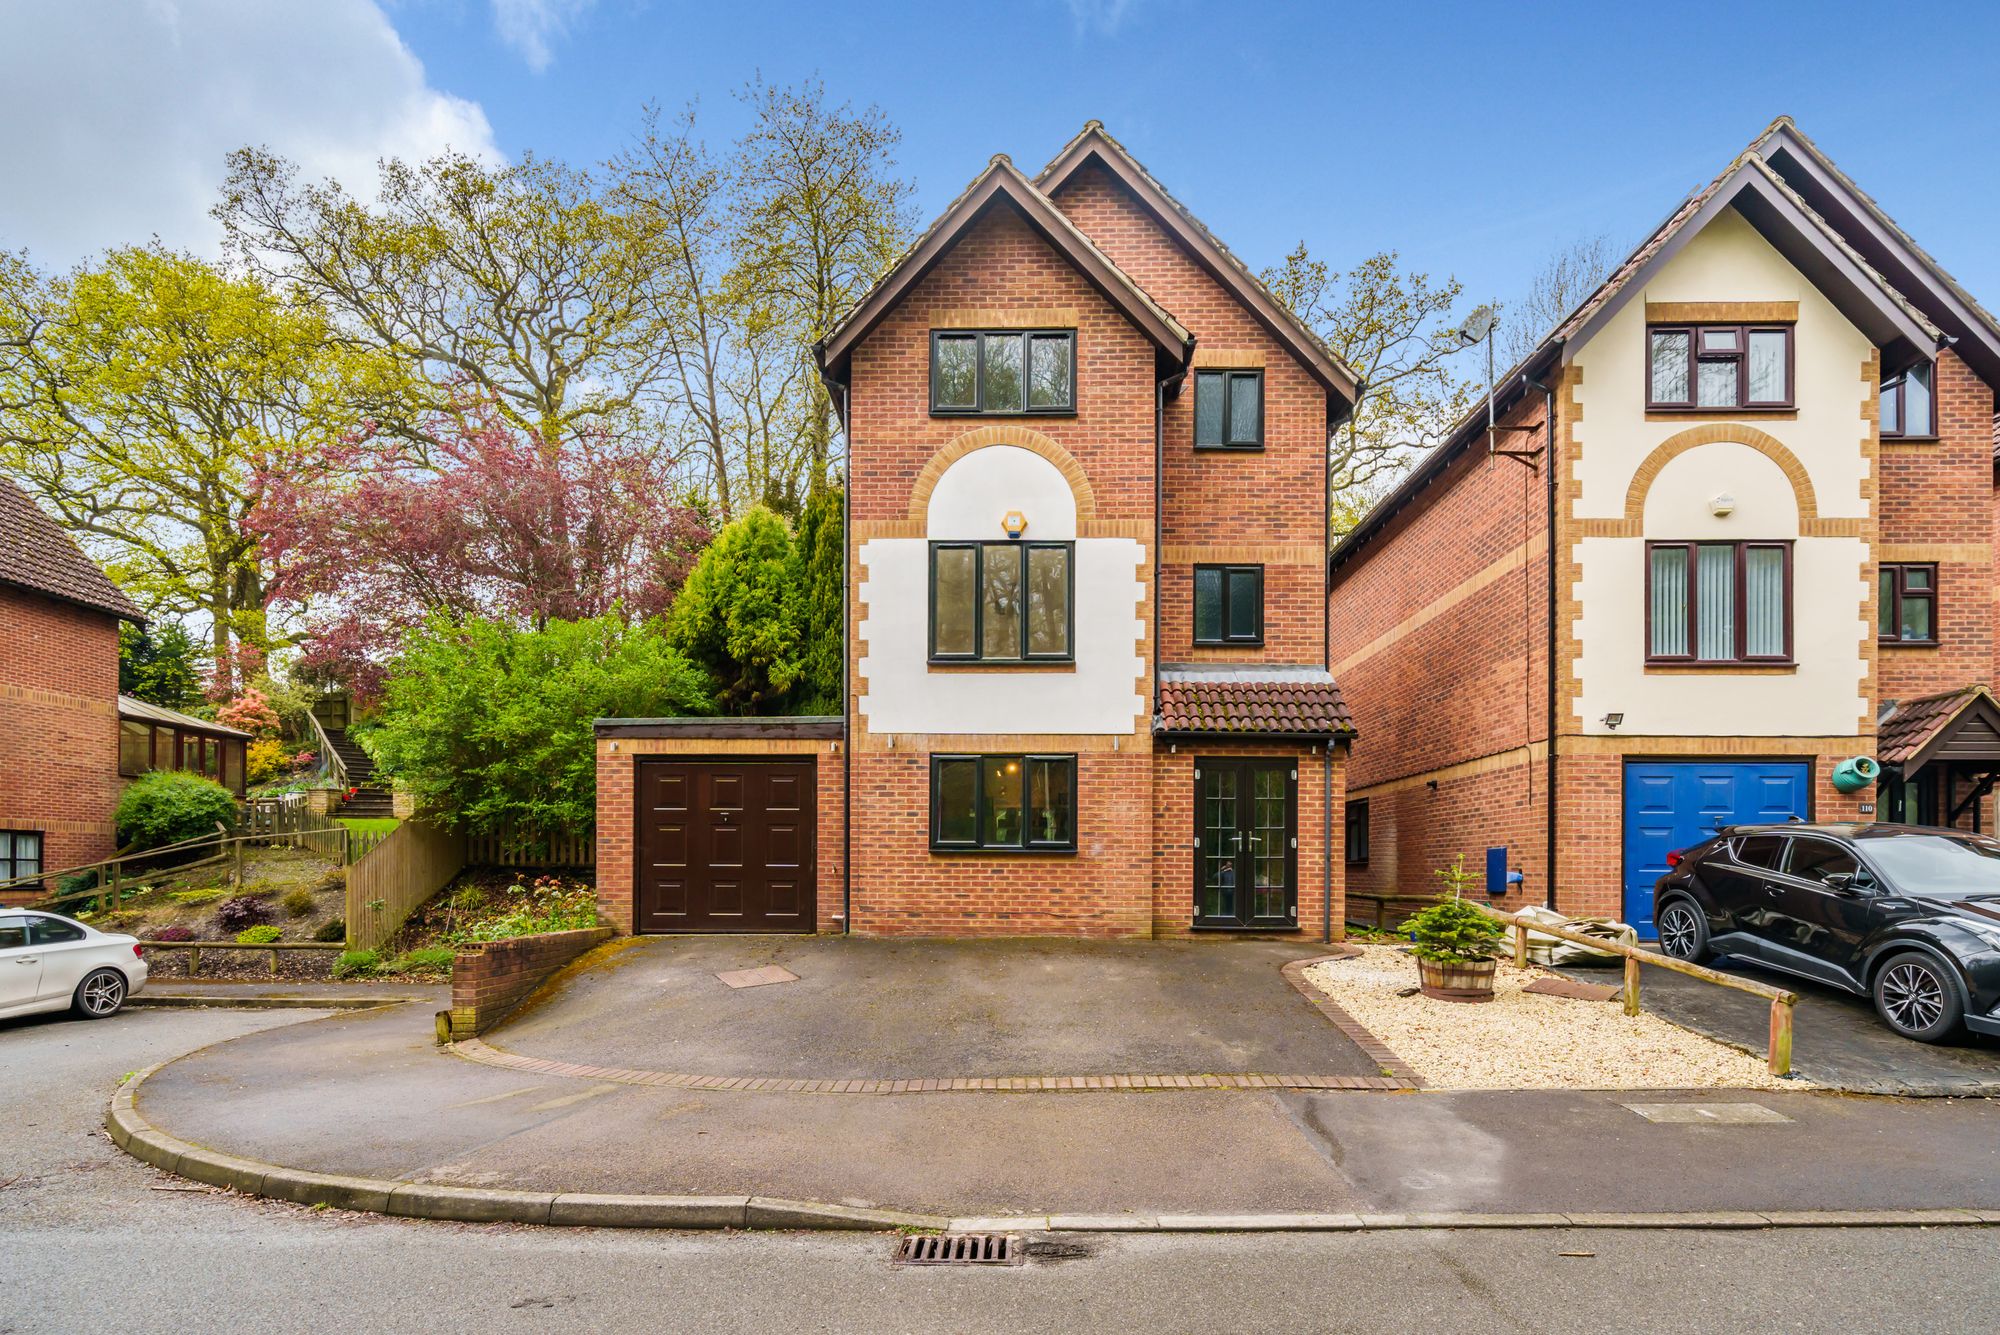 4 bed detached house for sale in Starlings Drive, Reading 0